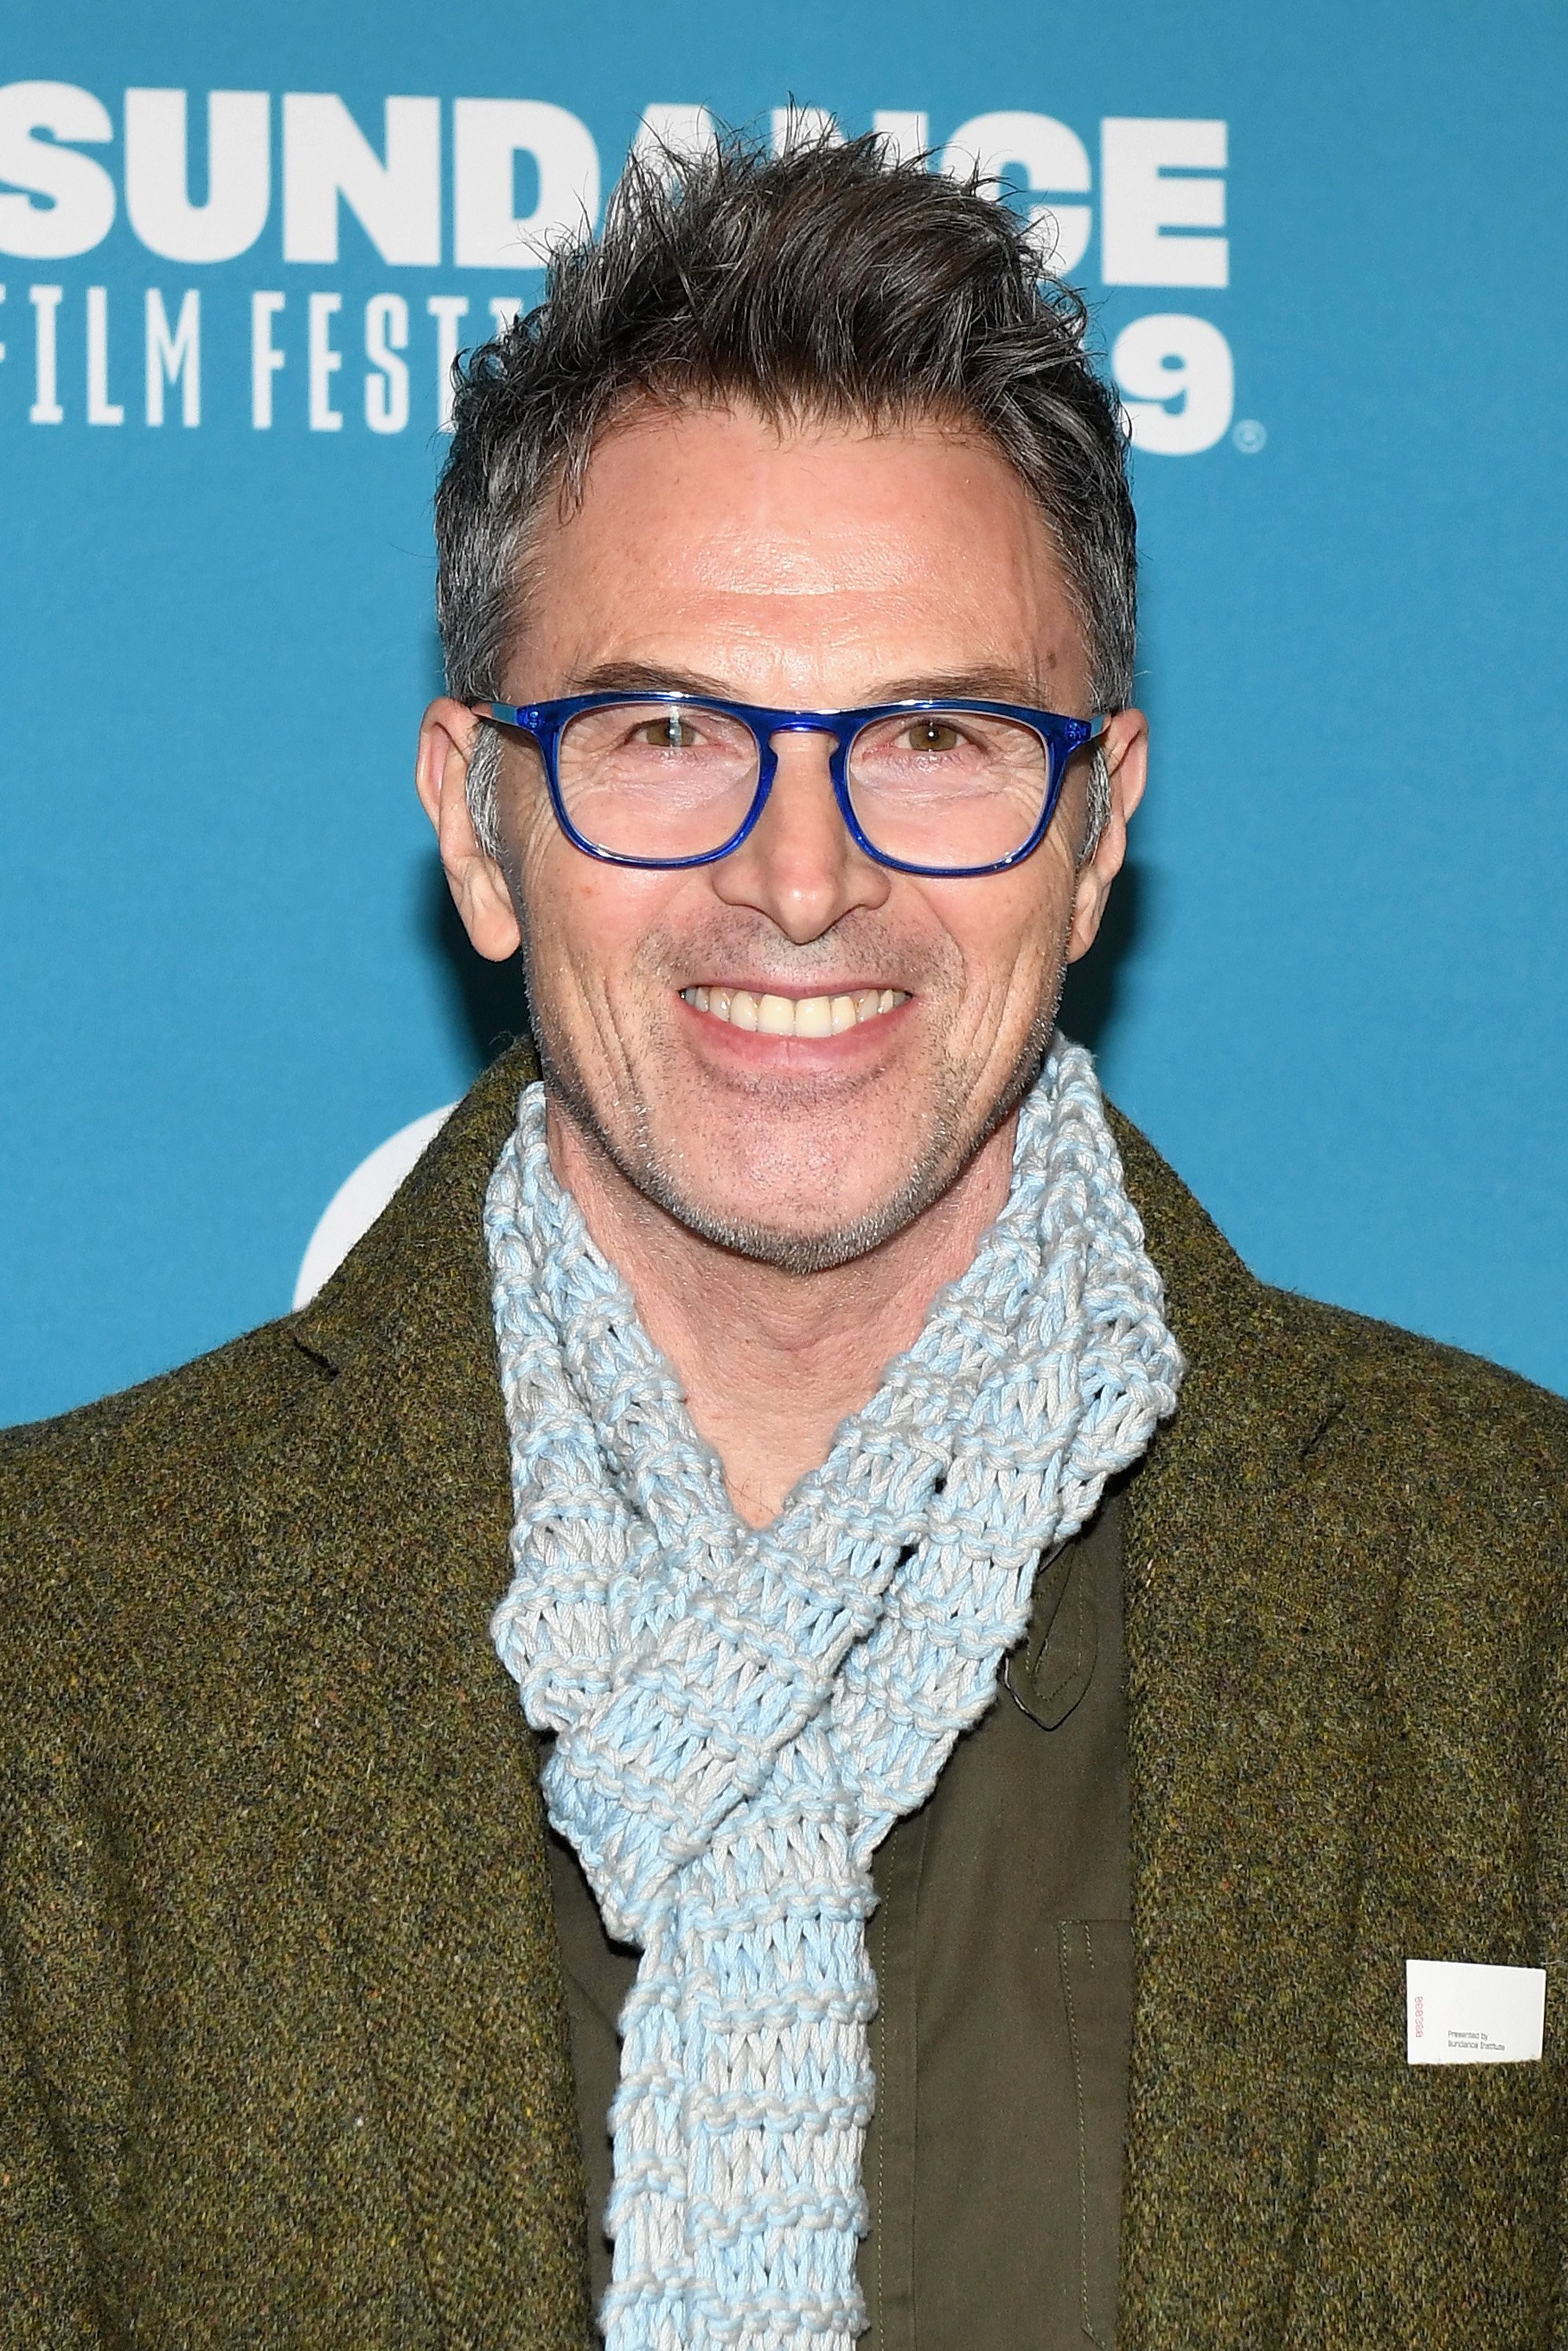 Tim Daly attends the "Before You Know It" Premiere during the 2019 Sundance Film Festival at Library Center Theater on January 27, 2019, in Park City, Utah. | Source: Getty Images.